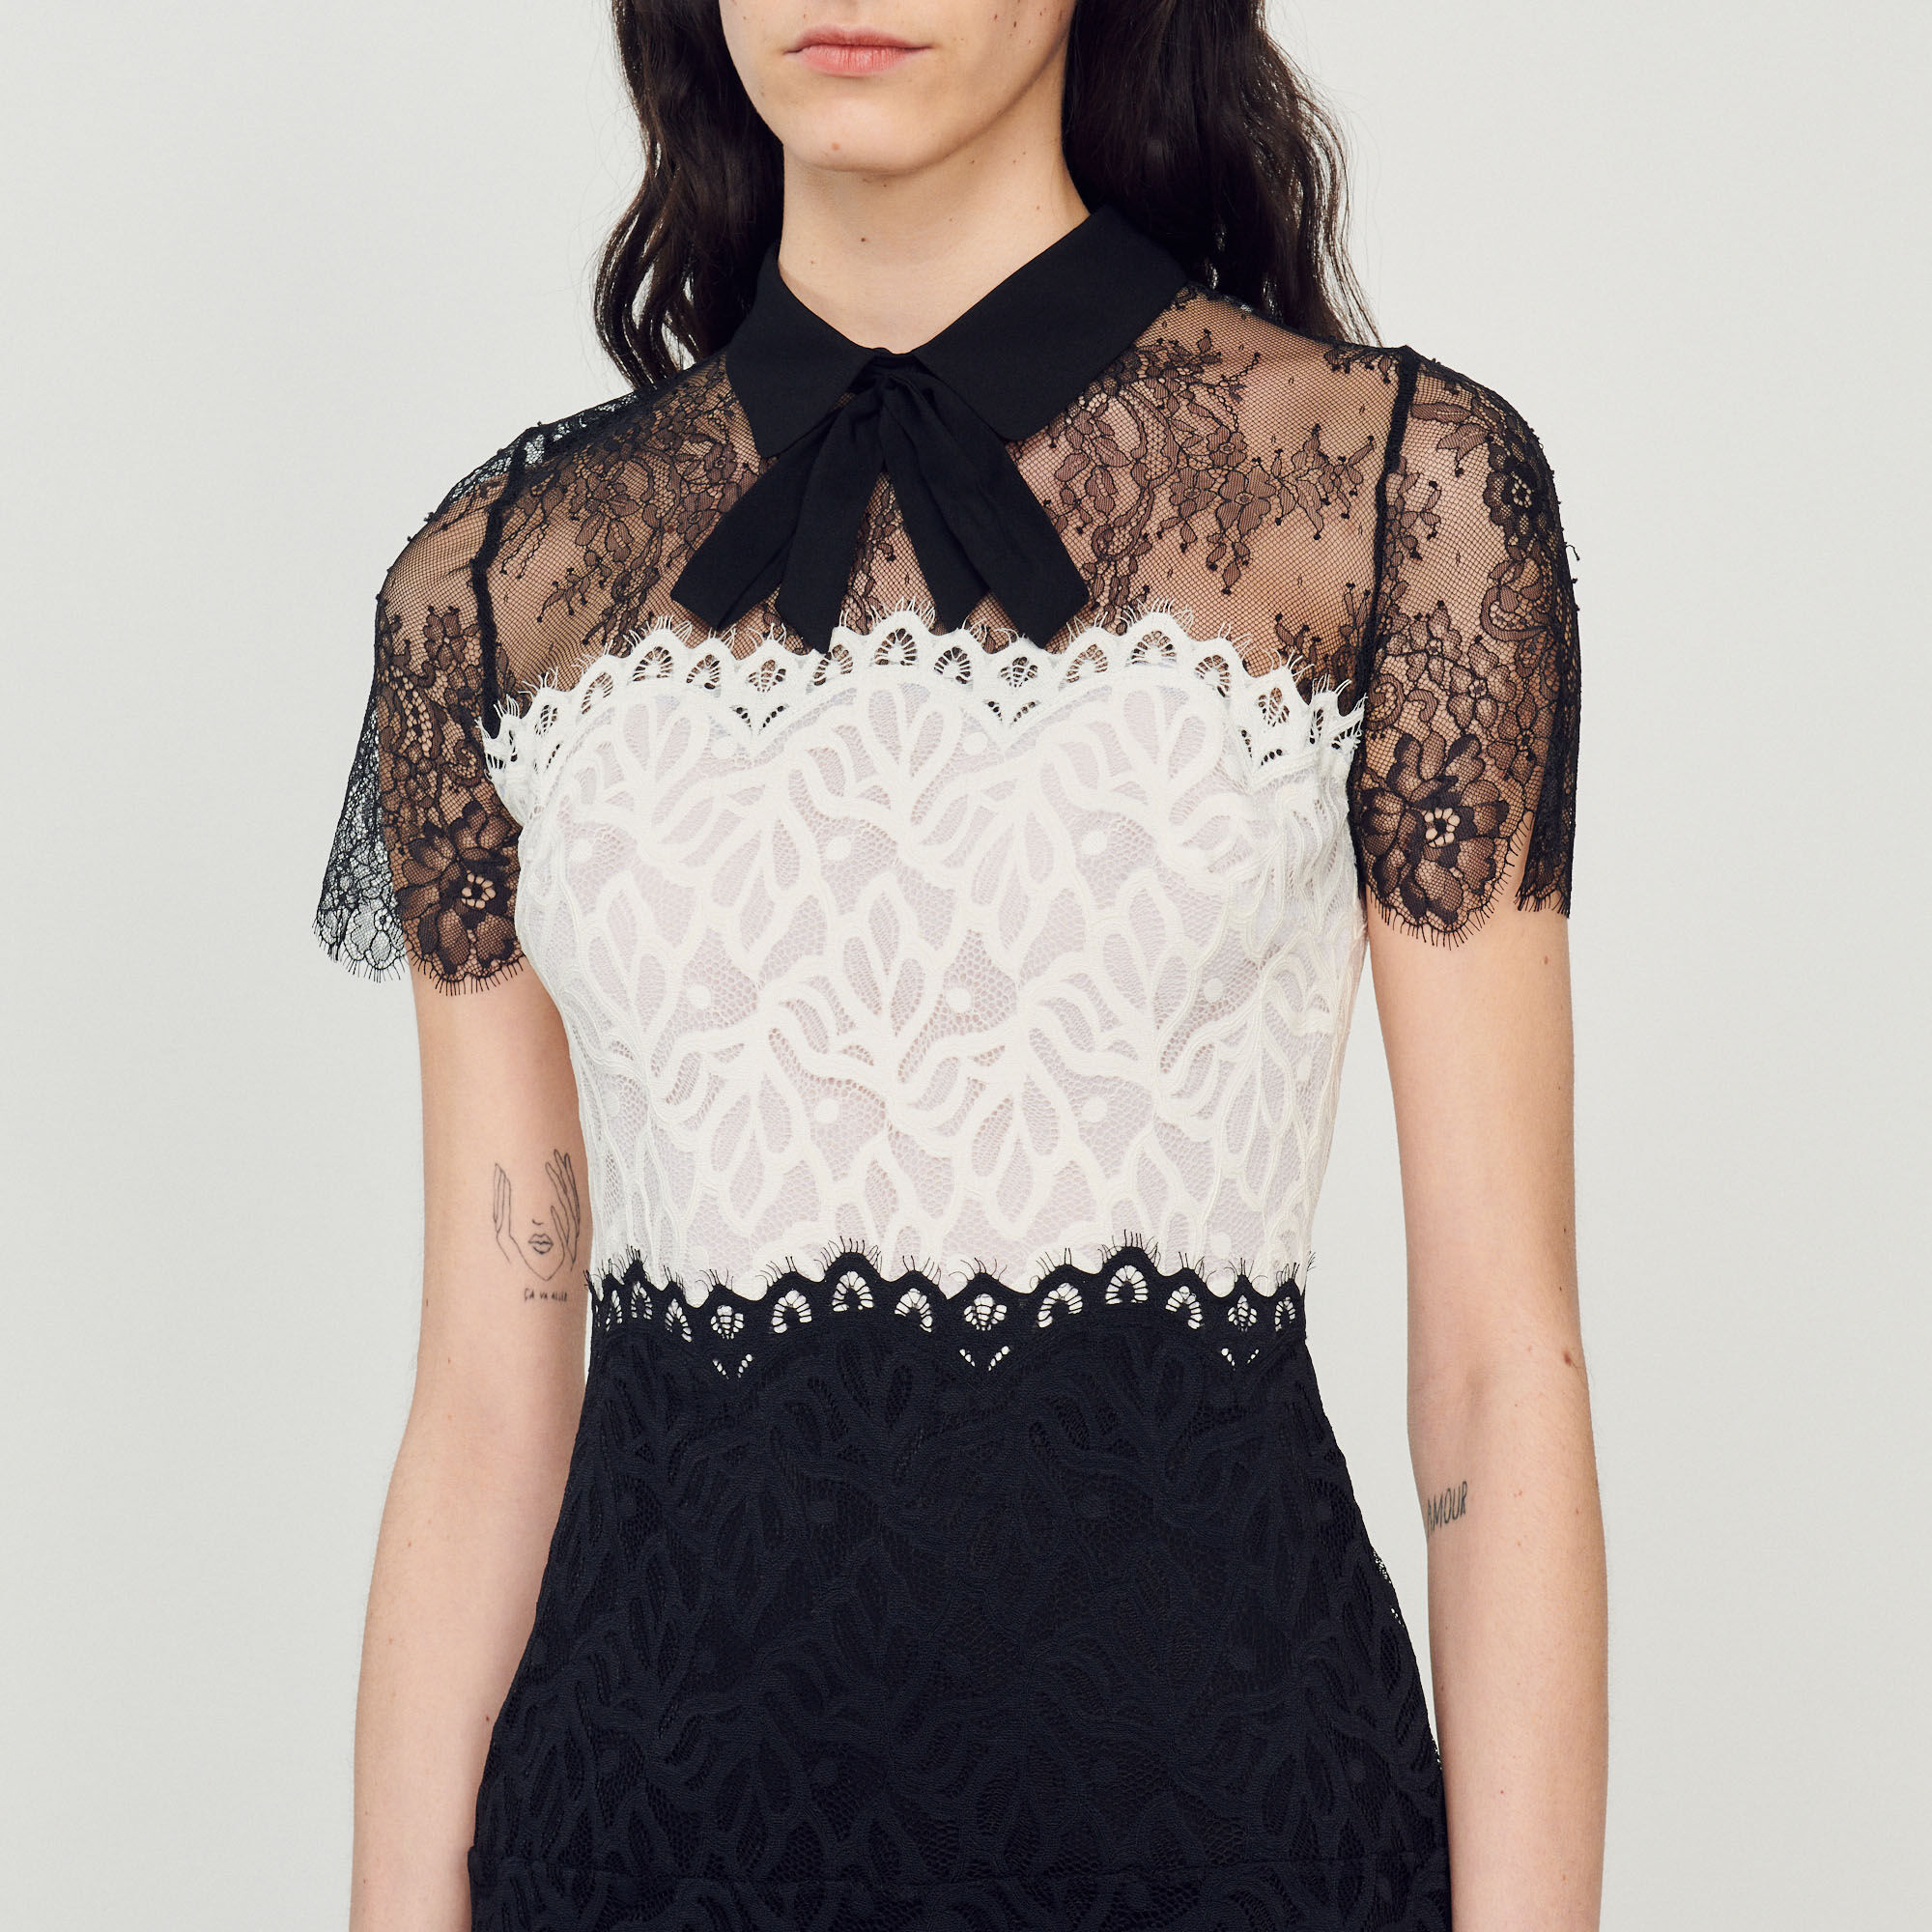 Two-tone lace dress Select a size and Login to add to Wish list